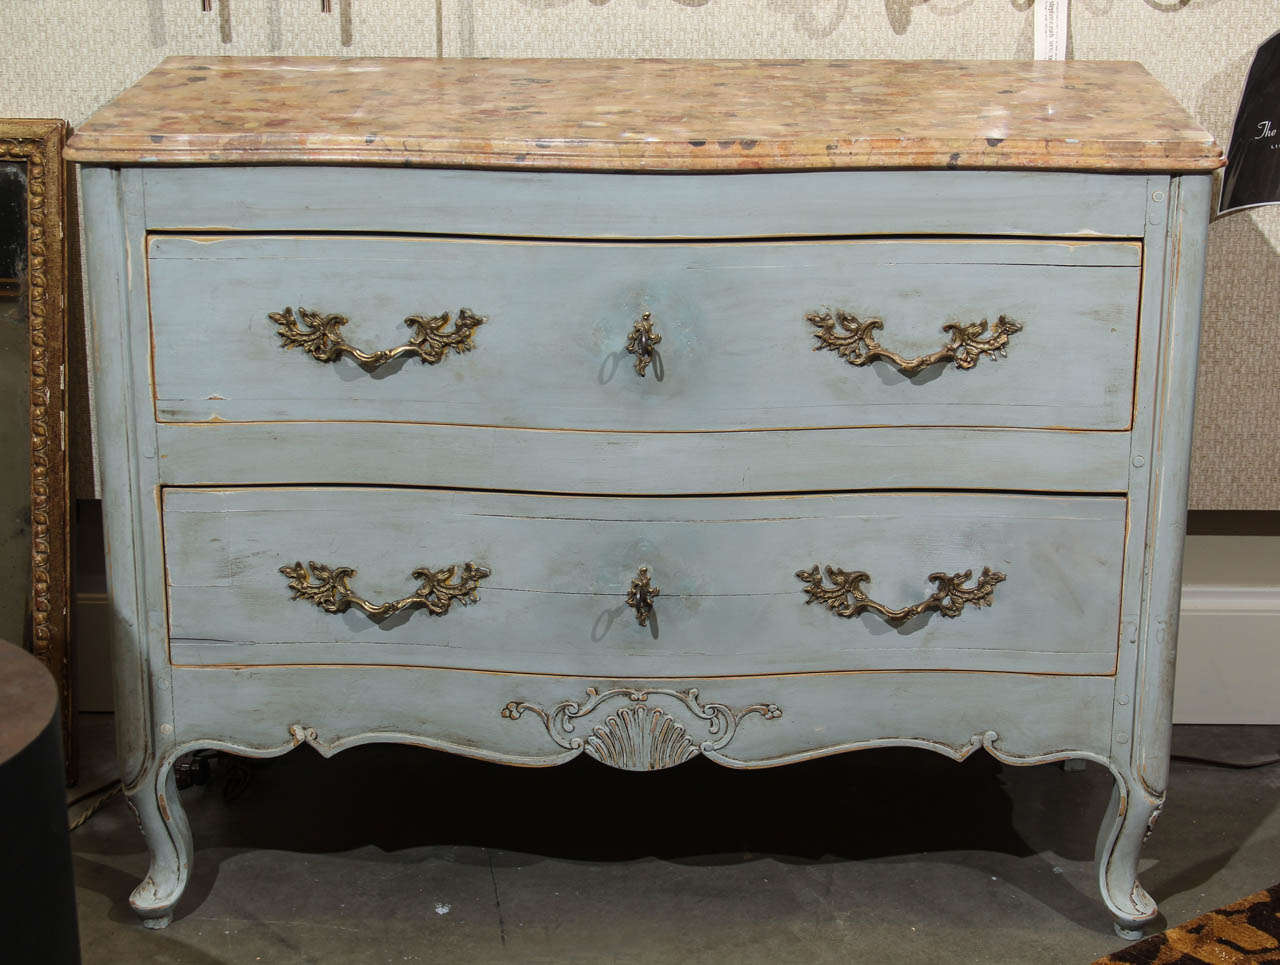 A vintage two drawer Louis XV style painted chest with marbleized top and distressed painted and beeswax finish